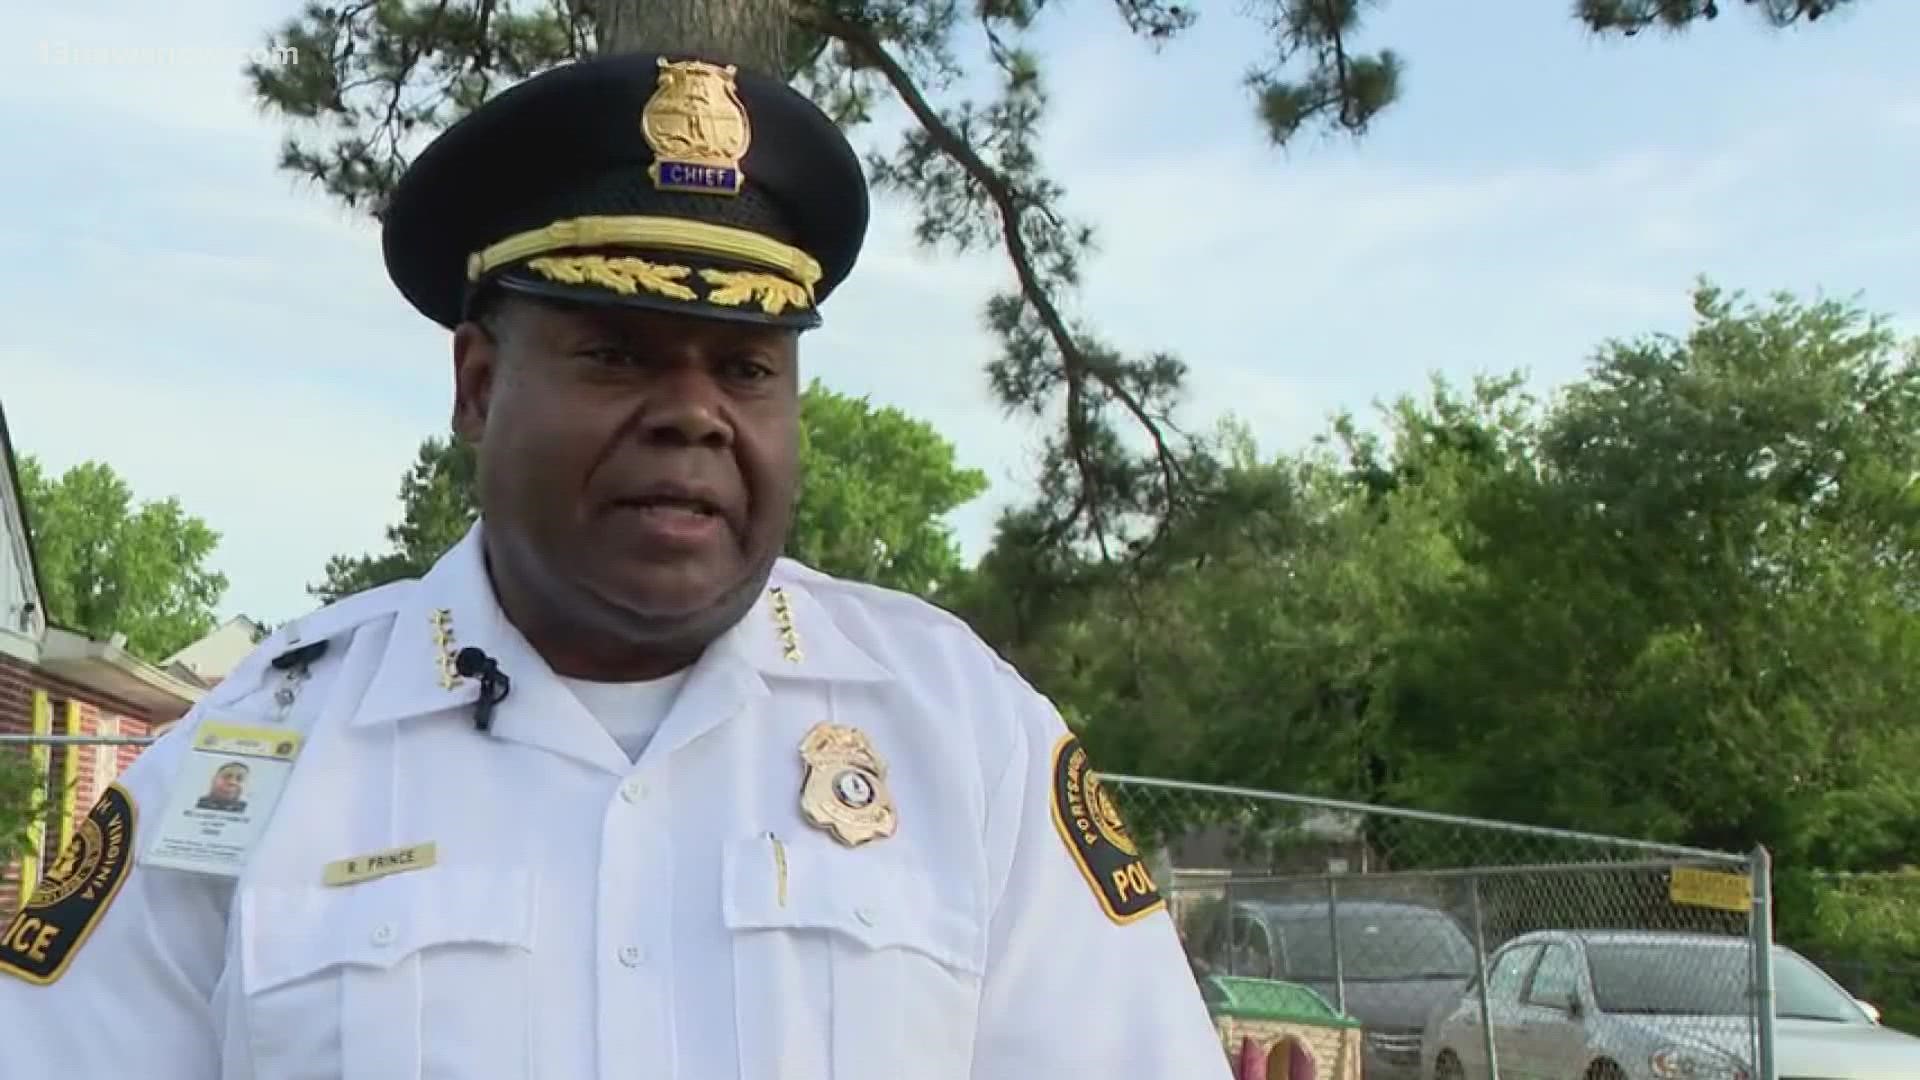 The latest police chief, Renado Prince, was only given 10 months to try and make a dent in crime before he was abruptly fired.